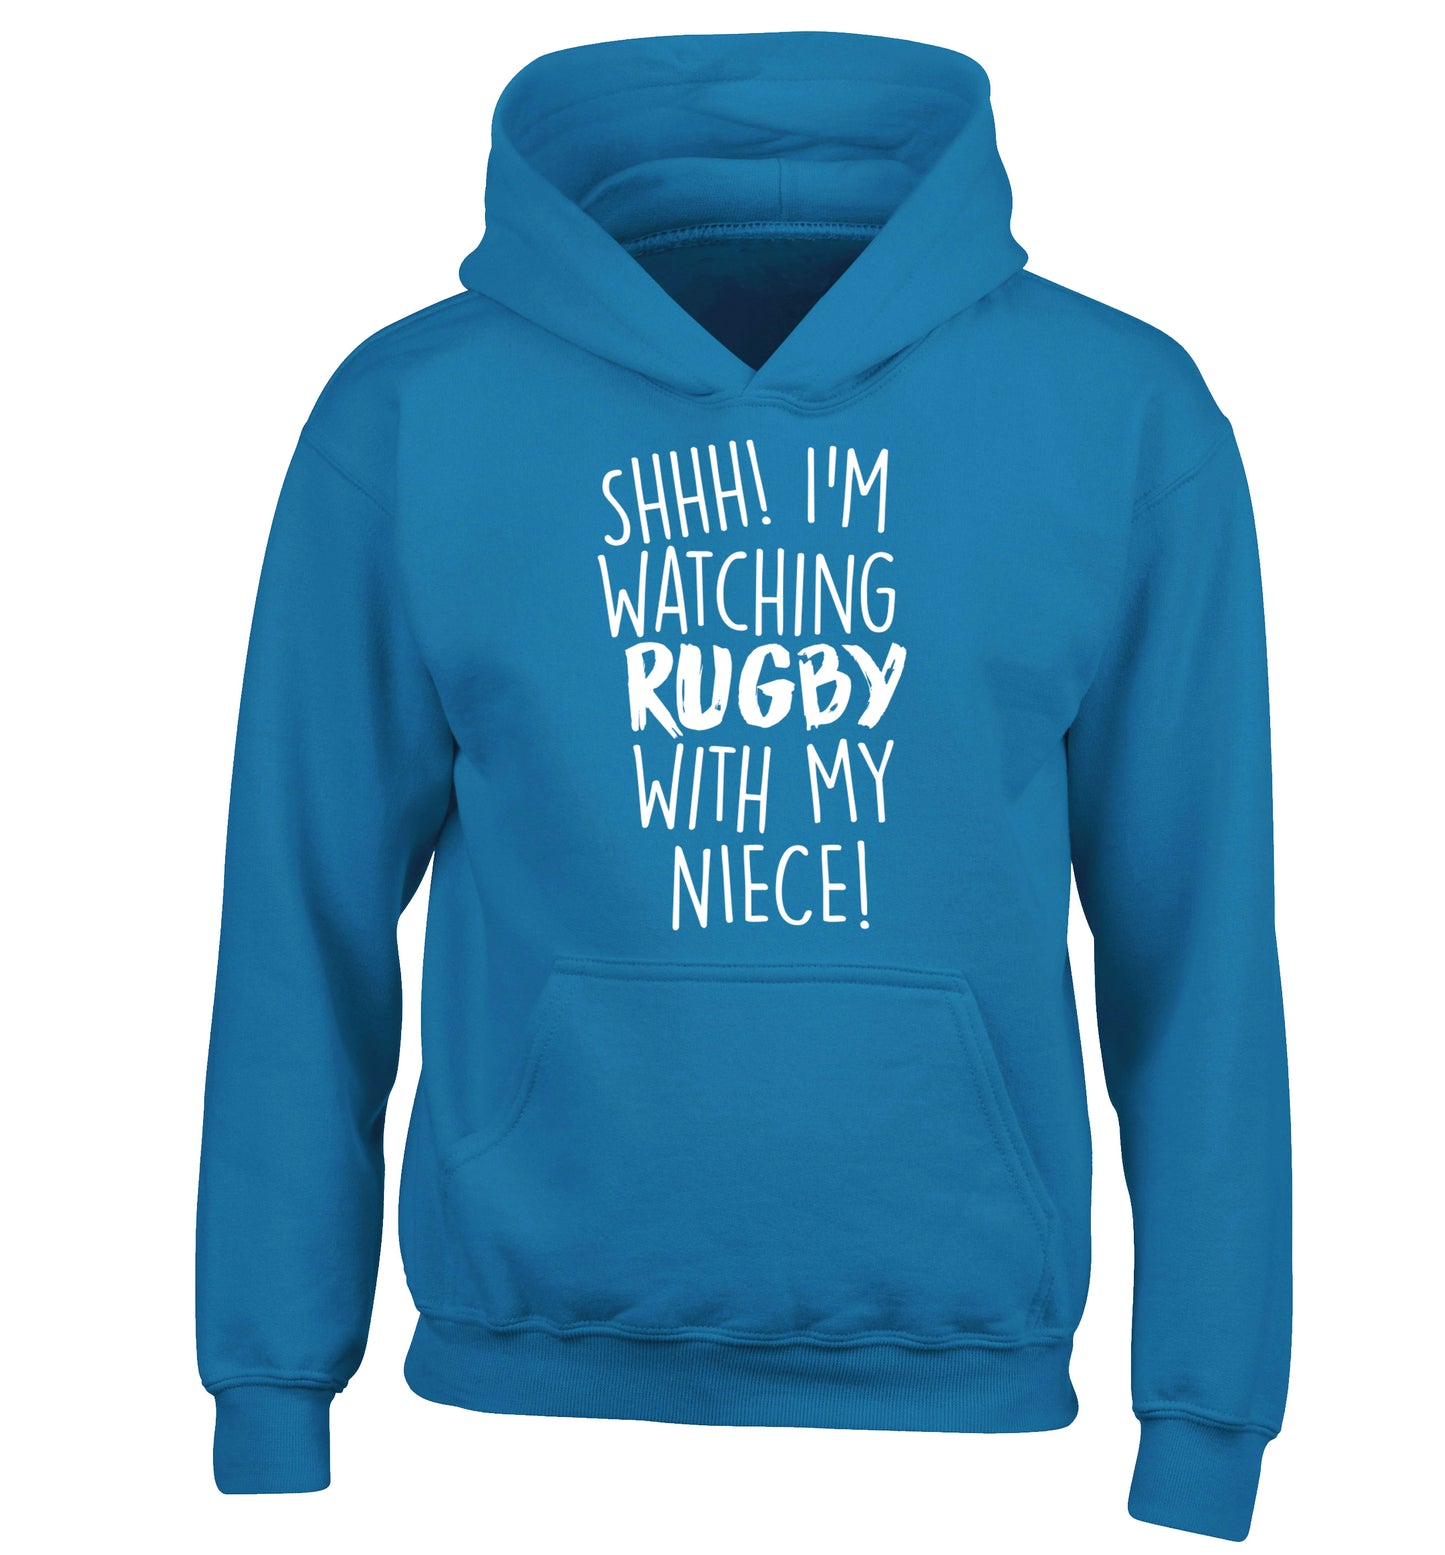 Shh.. I'm watching rugby with my niece children's blue hoodie 12-13 Years